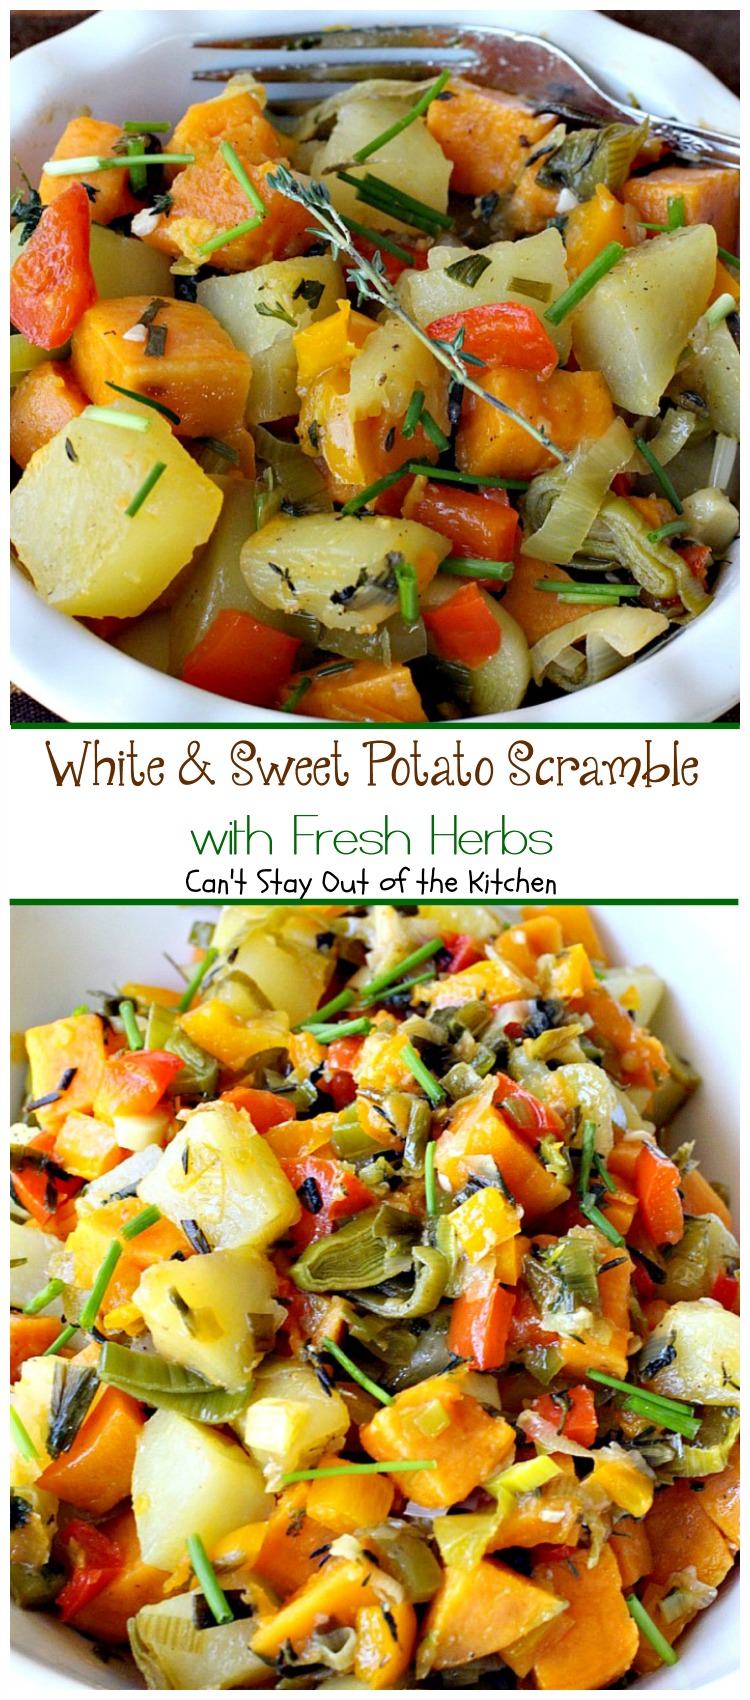 White and Sweet Potato Scramble with Fresh Herbs | Can't Stay Out of the Kitchen